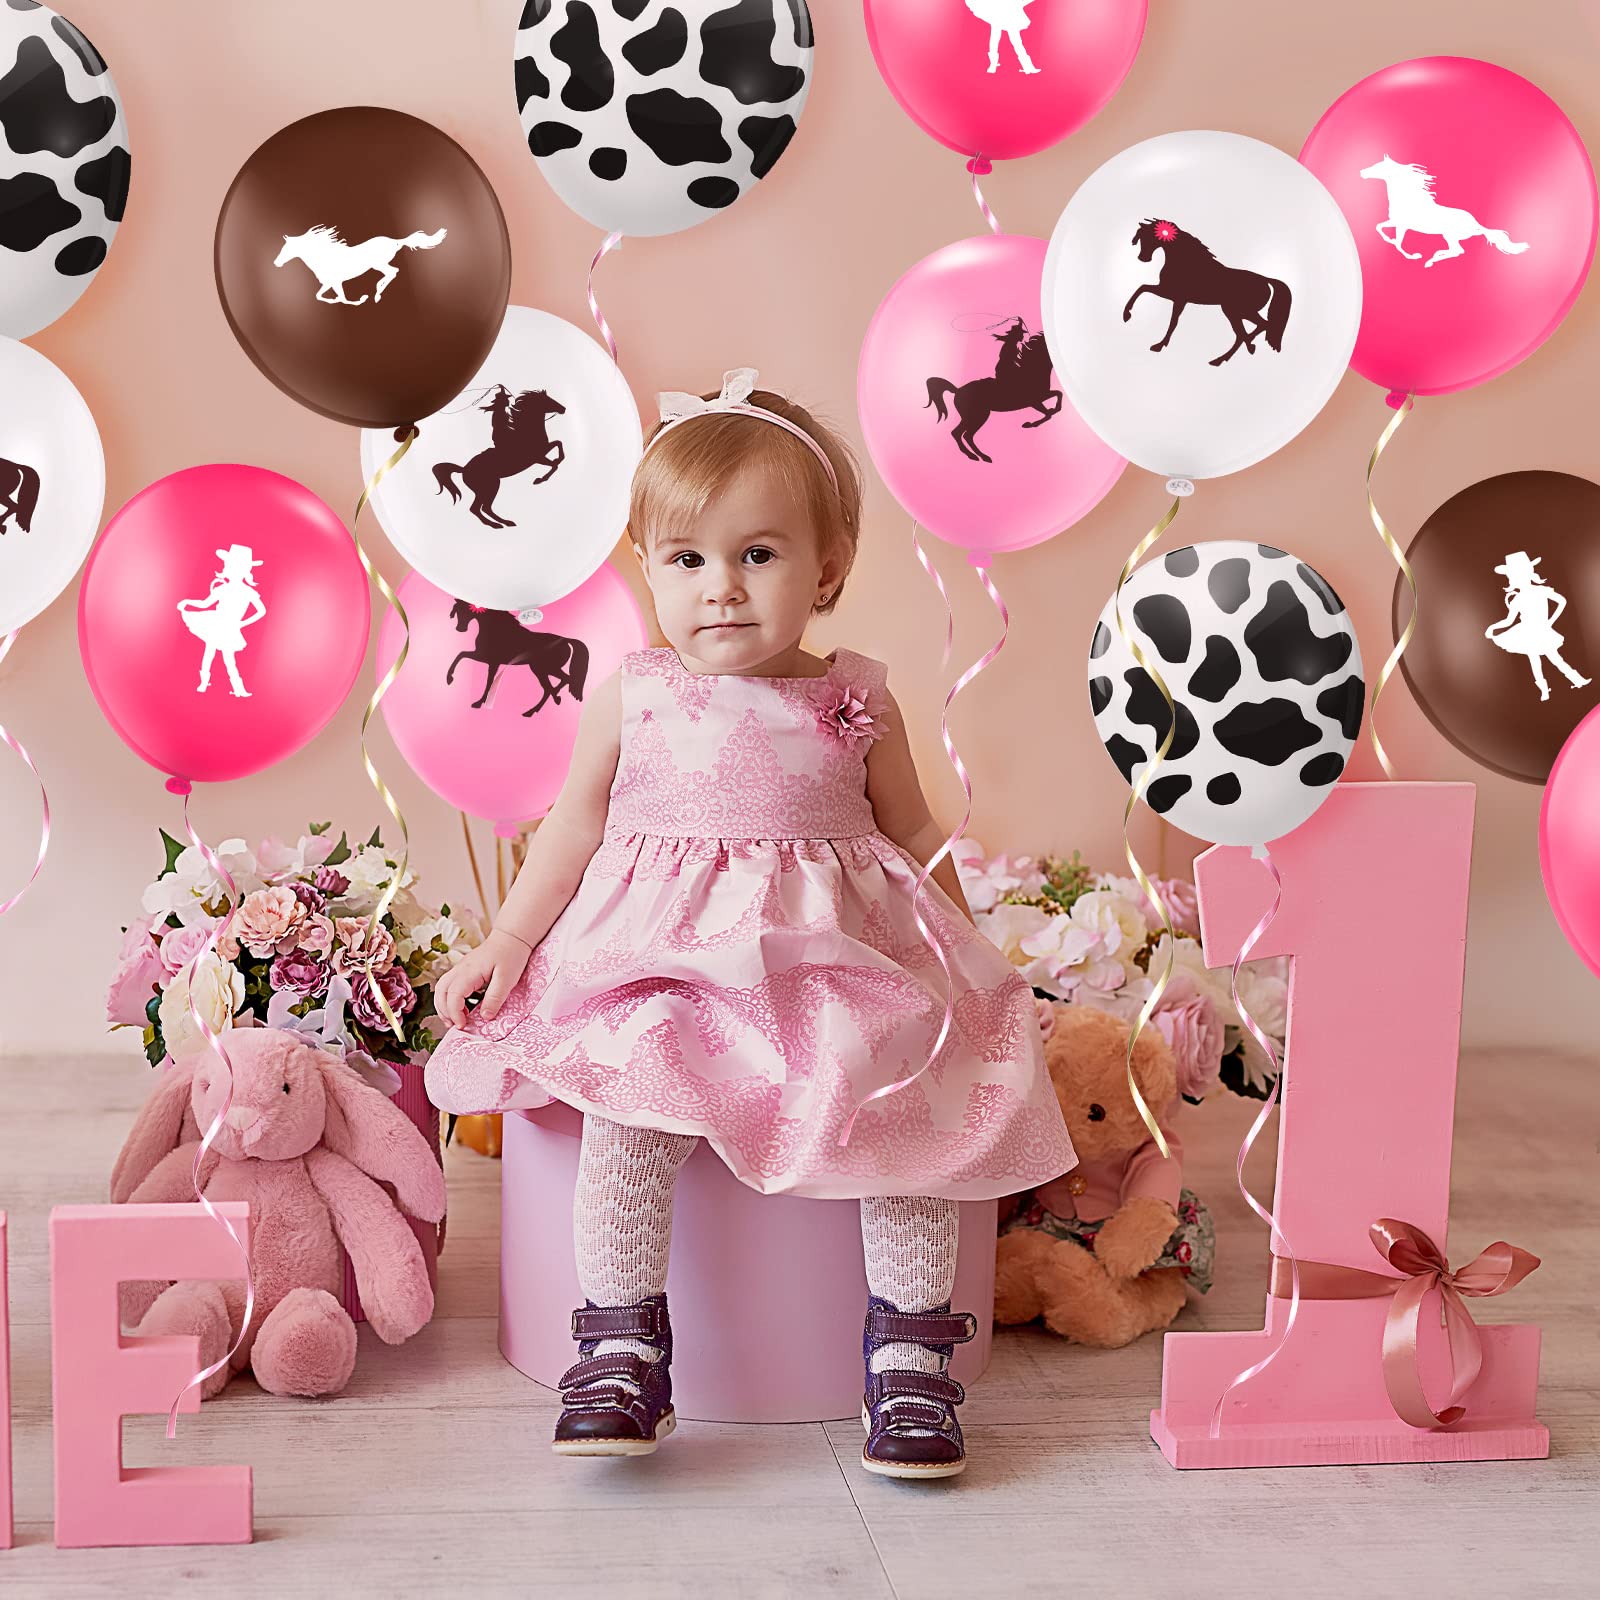 50 Pcs Cowgirl Balloons 12 Inch Western Cowgirl Cowboy Theme Party Decorations Bachelorette Birthday Cow Print Latex Balloons Pink Brown Balloons for Cowgirl Bachelorette Party Supplies